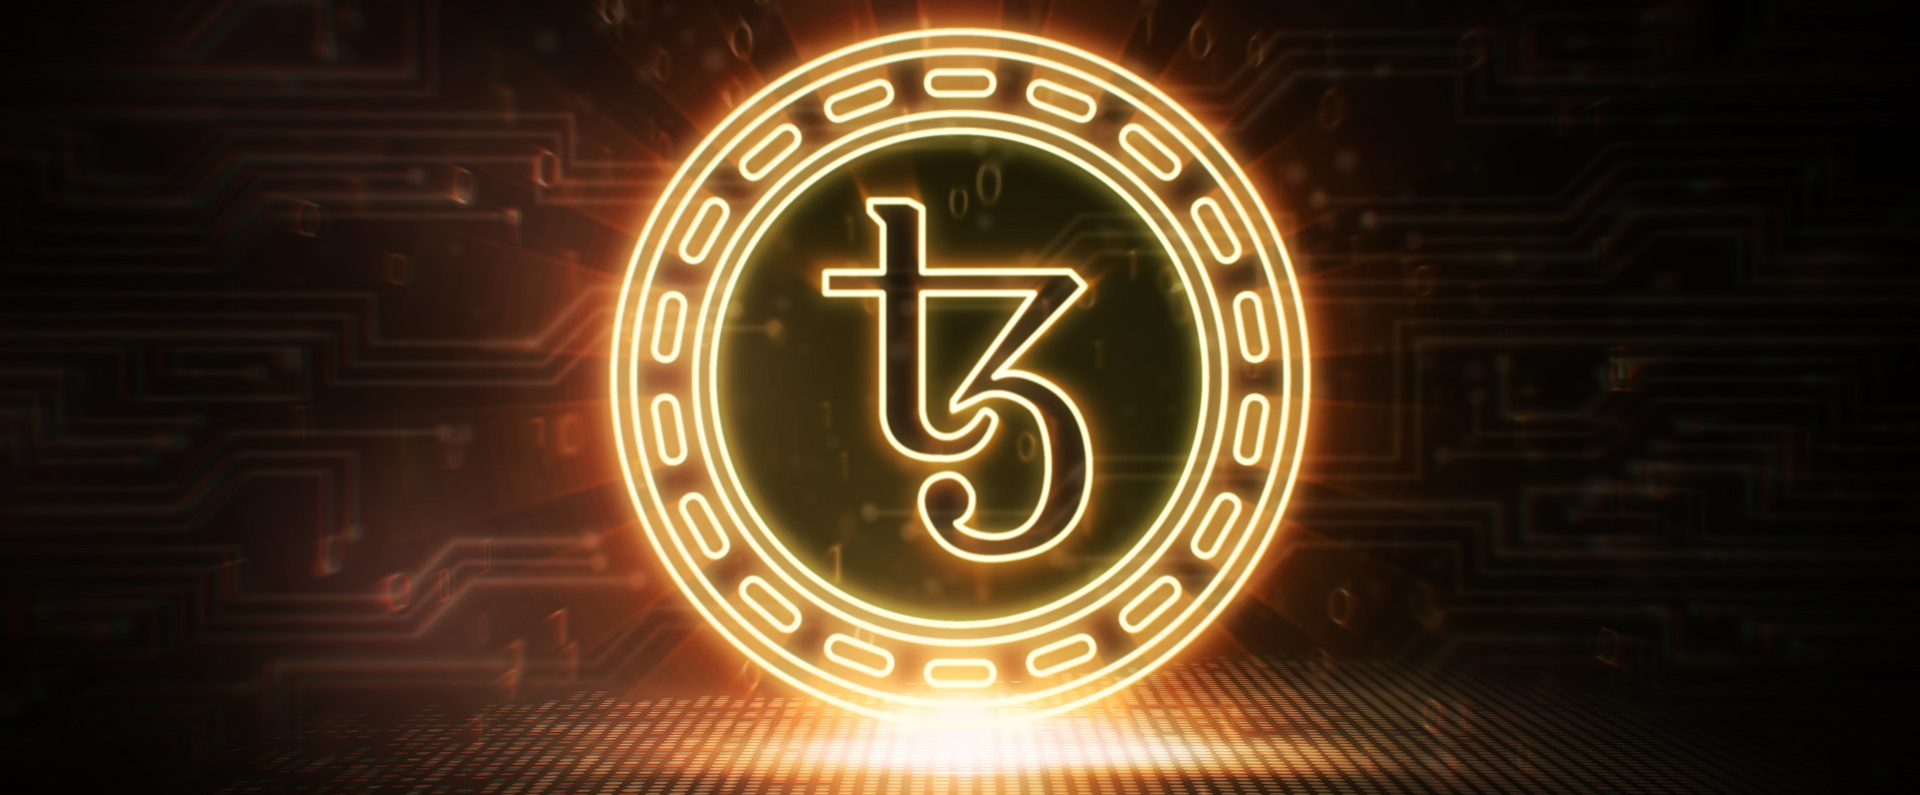 Features of Tezos cryptocurrency